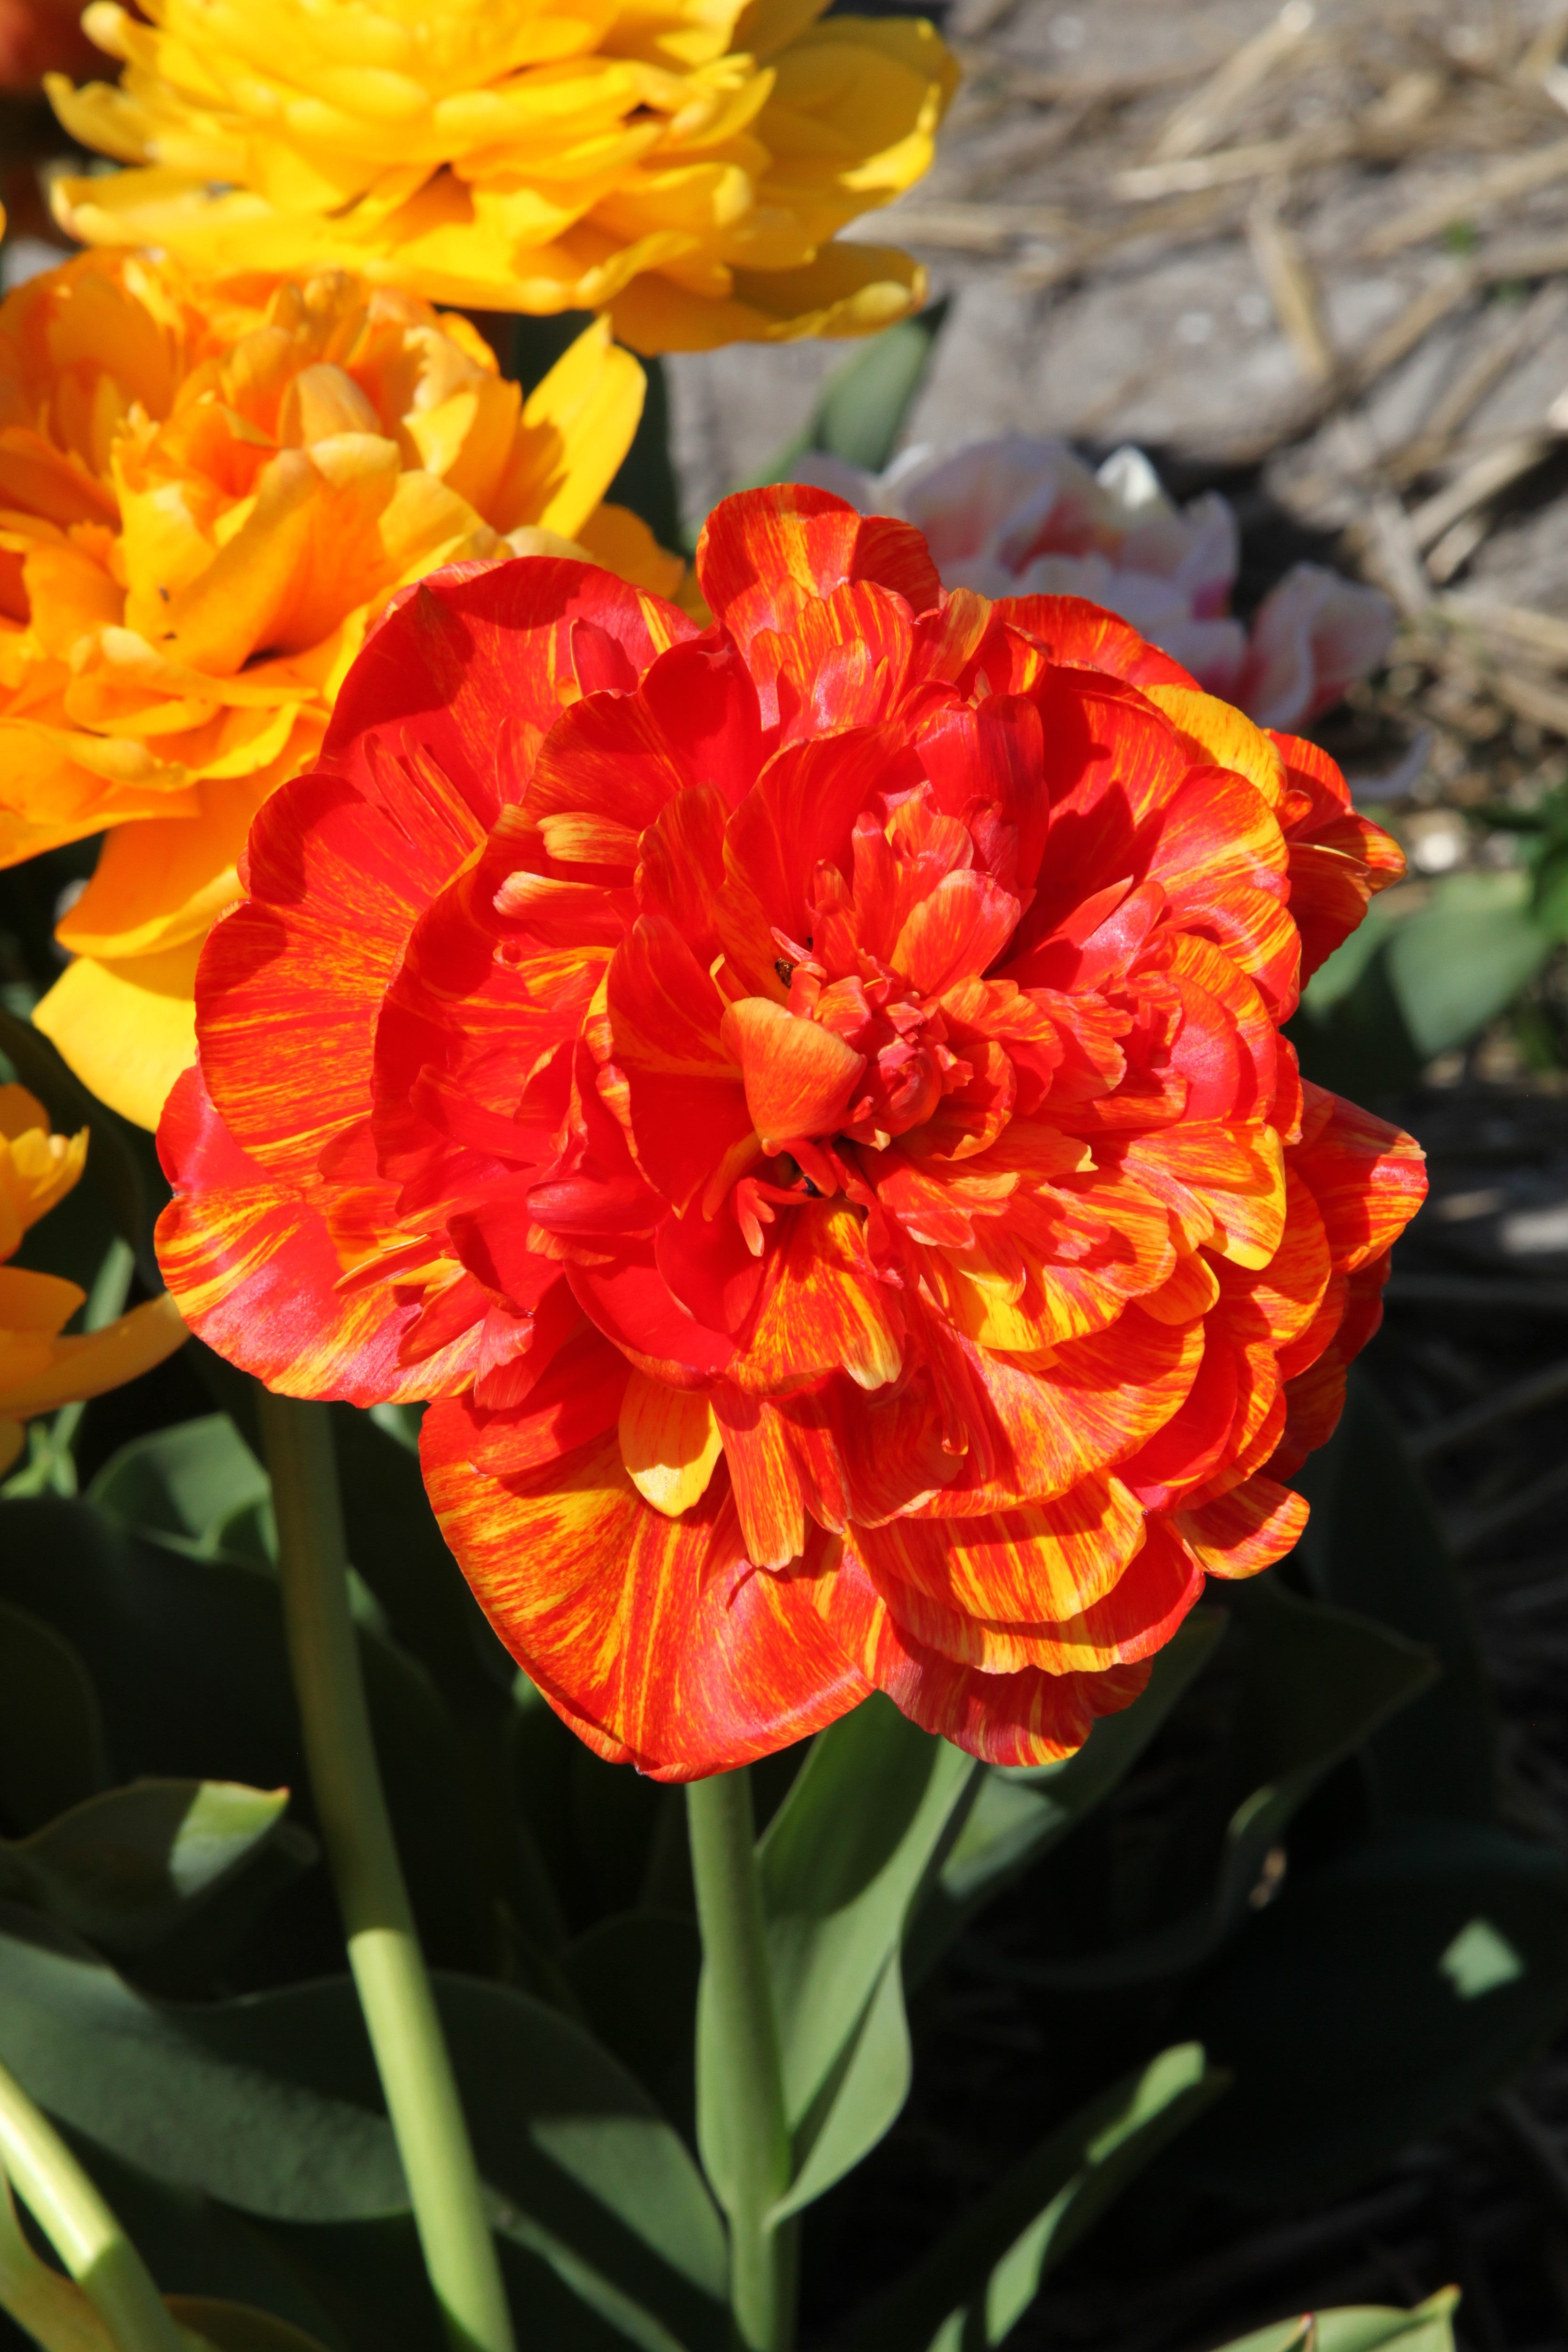 Sunlover, a stunning double late tulip with radiant red and yellow blooms